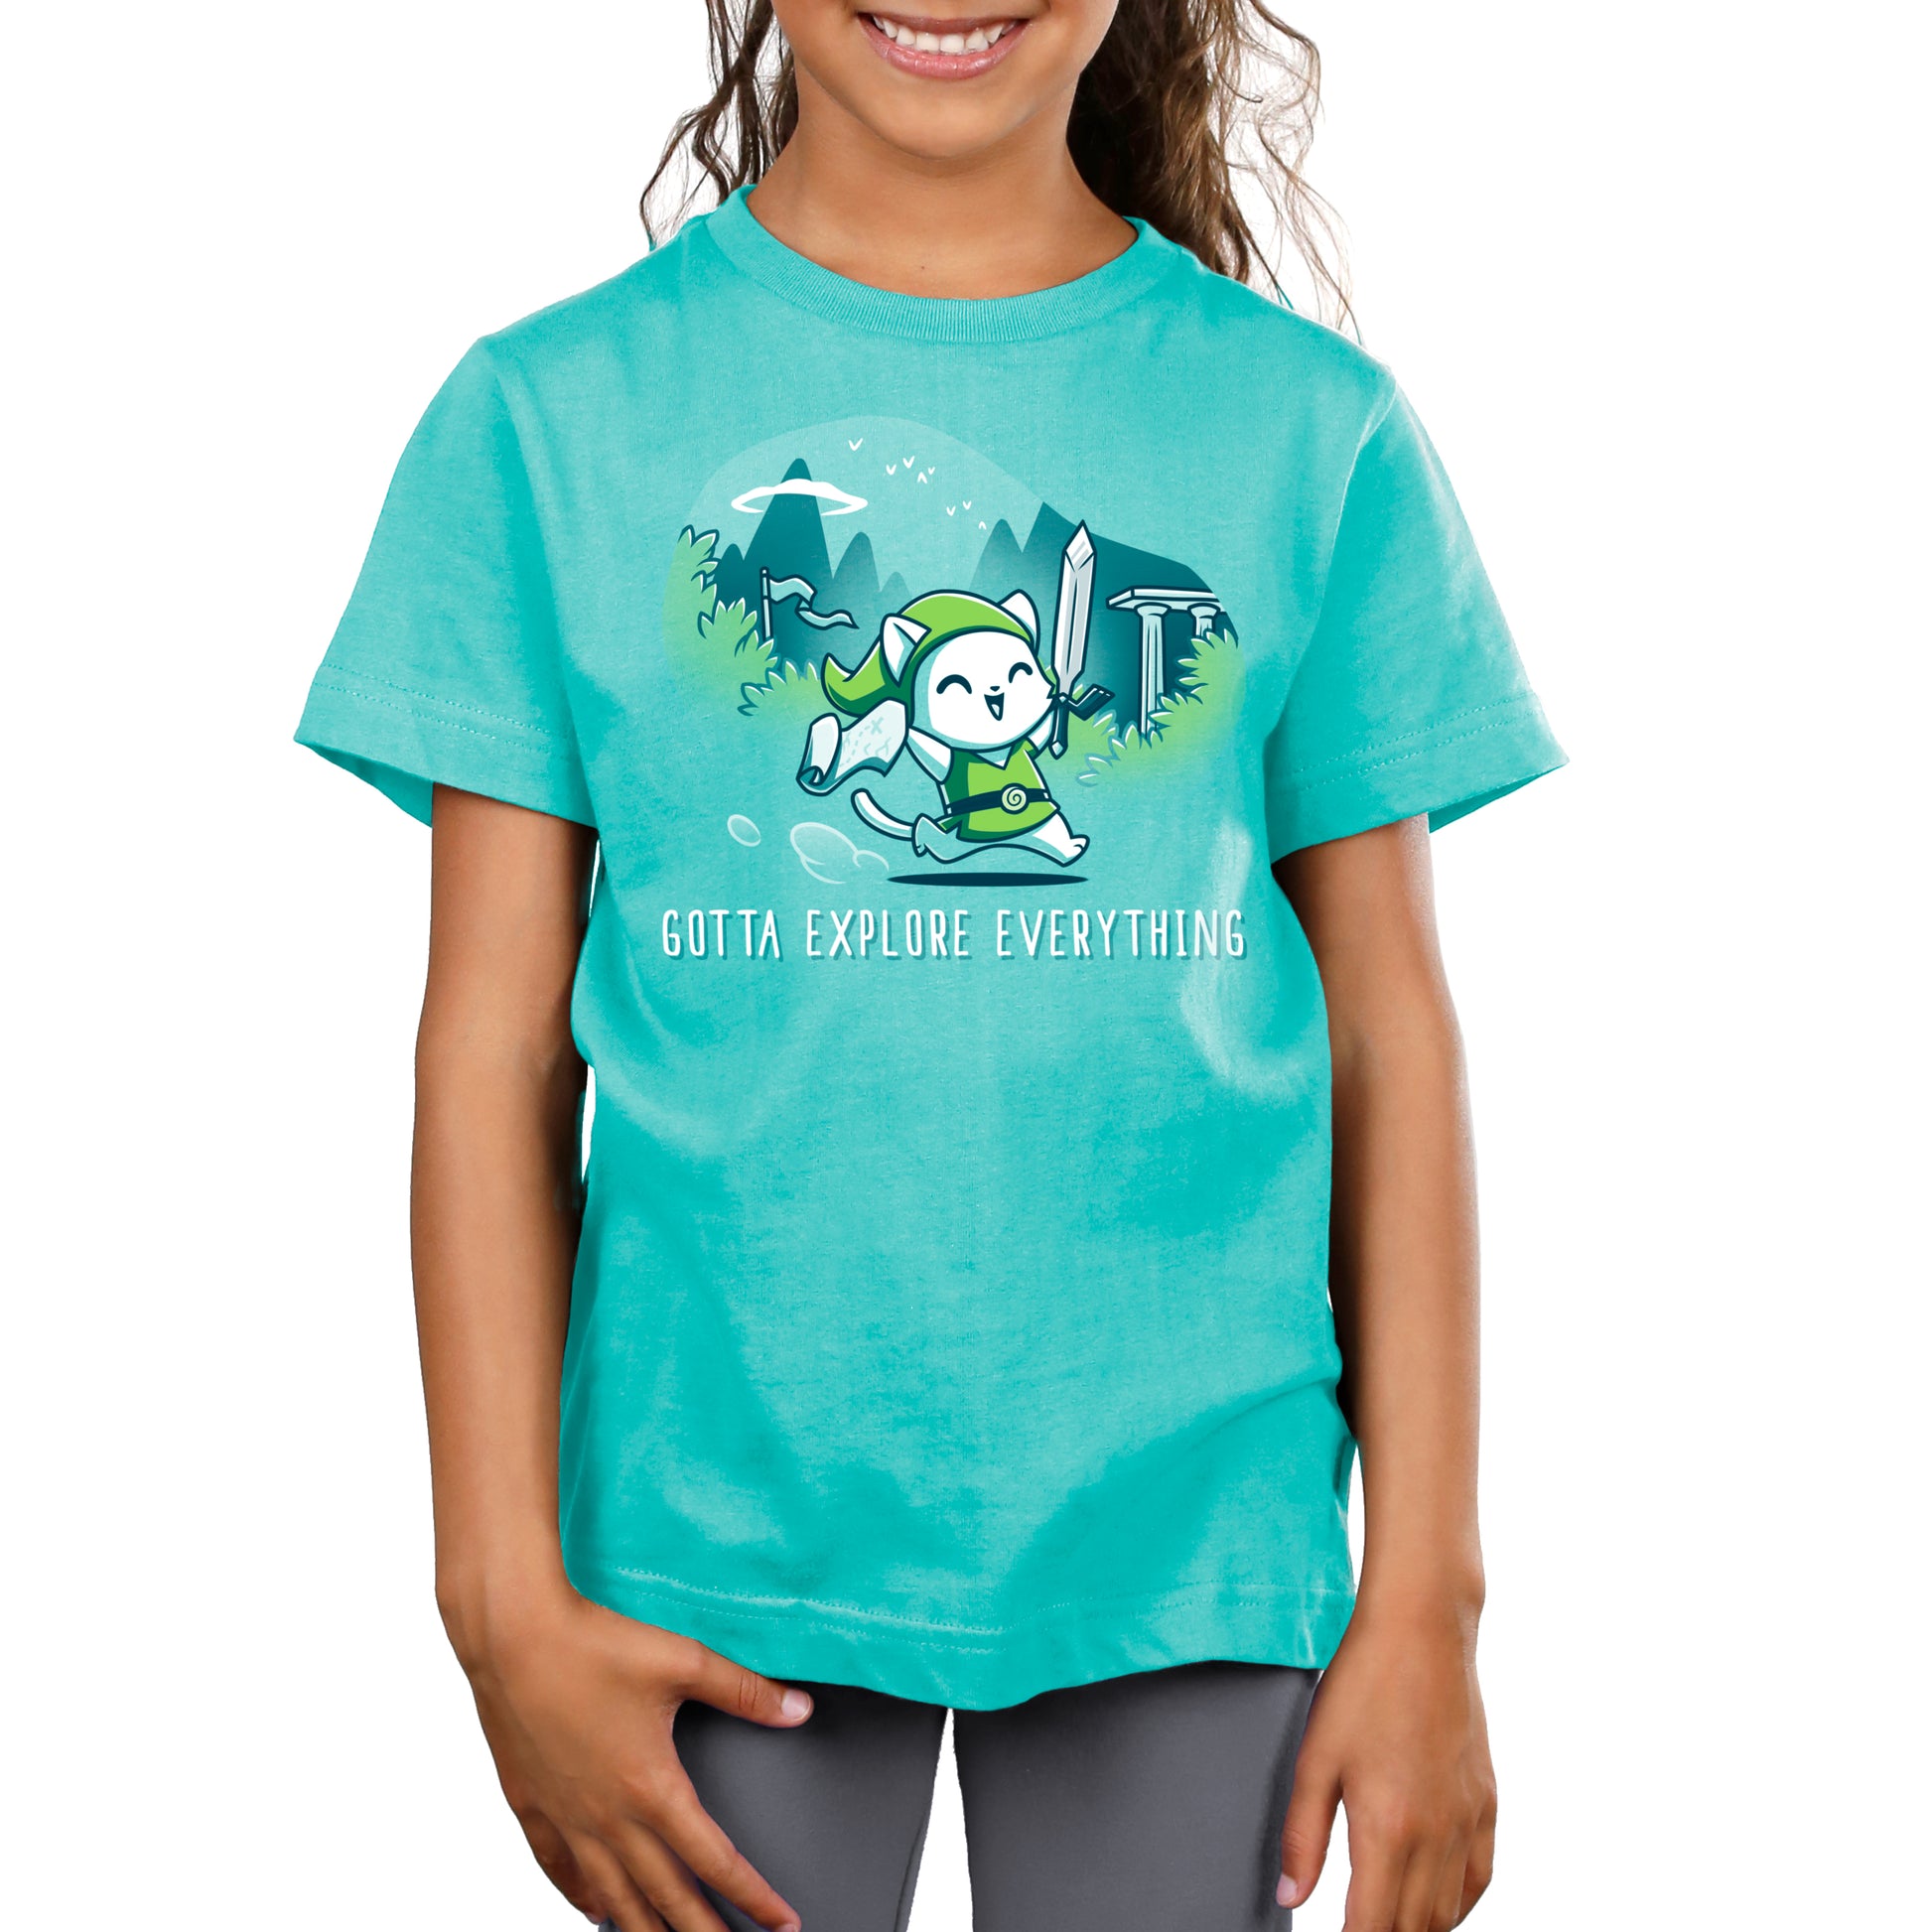 A young girl wearing a TeeTurtle "Gotta Explore Everything" t-shirt that says "save your world.